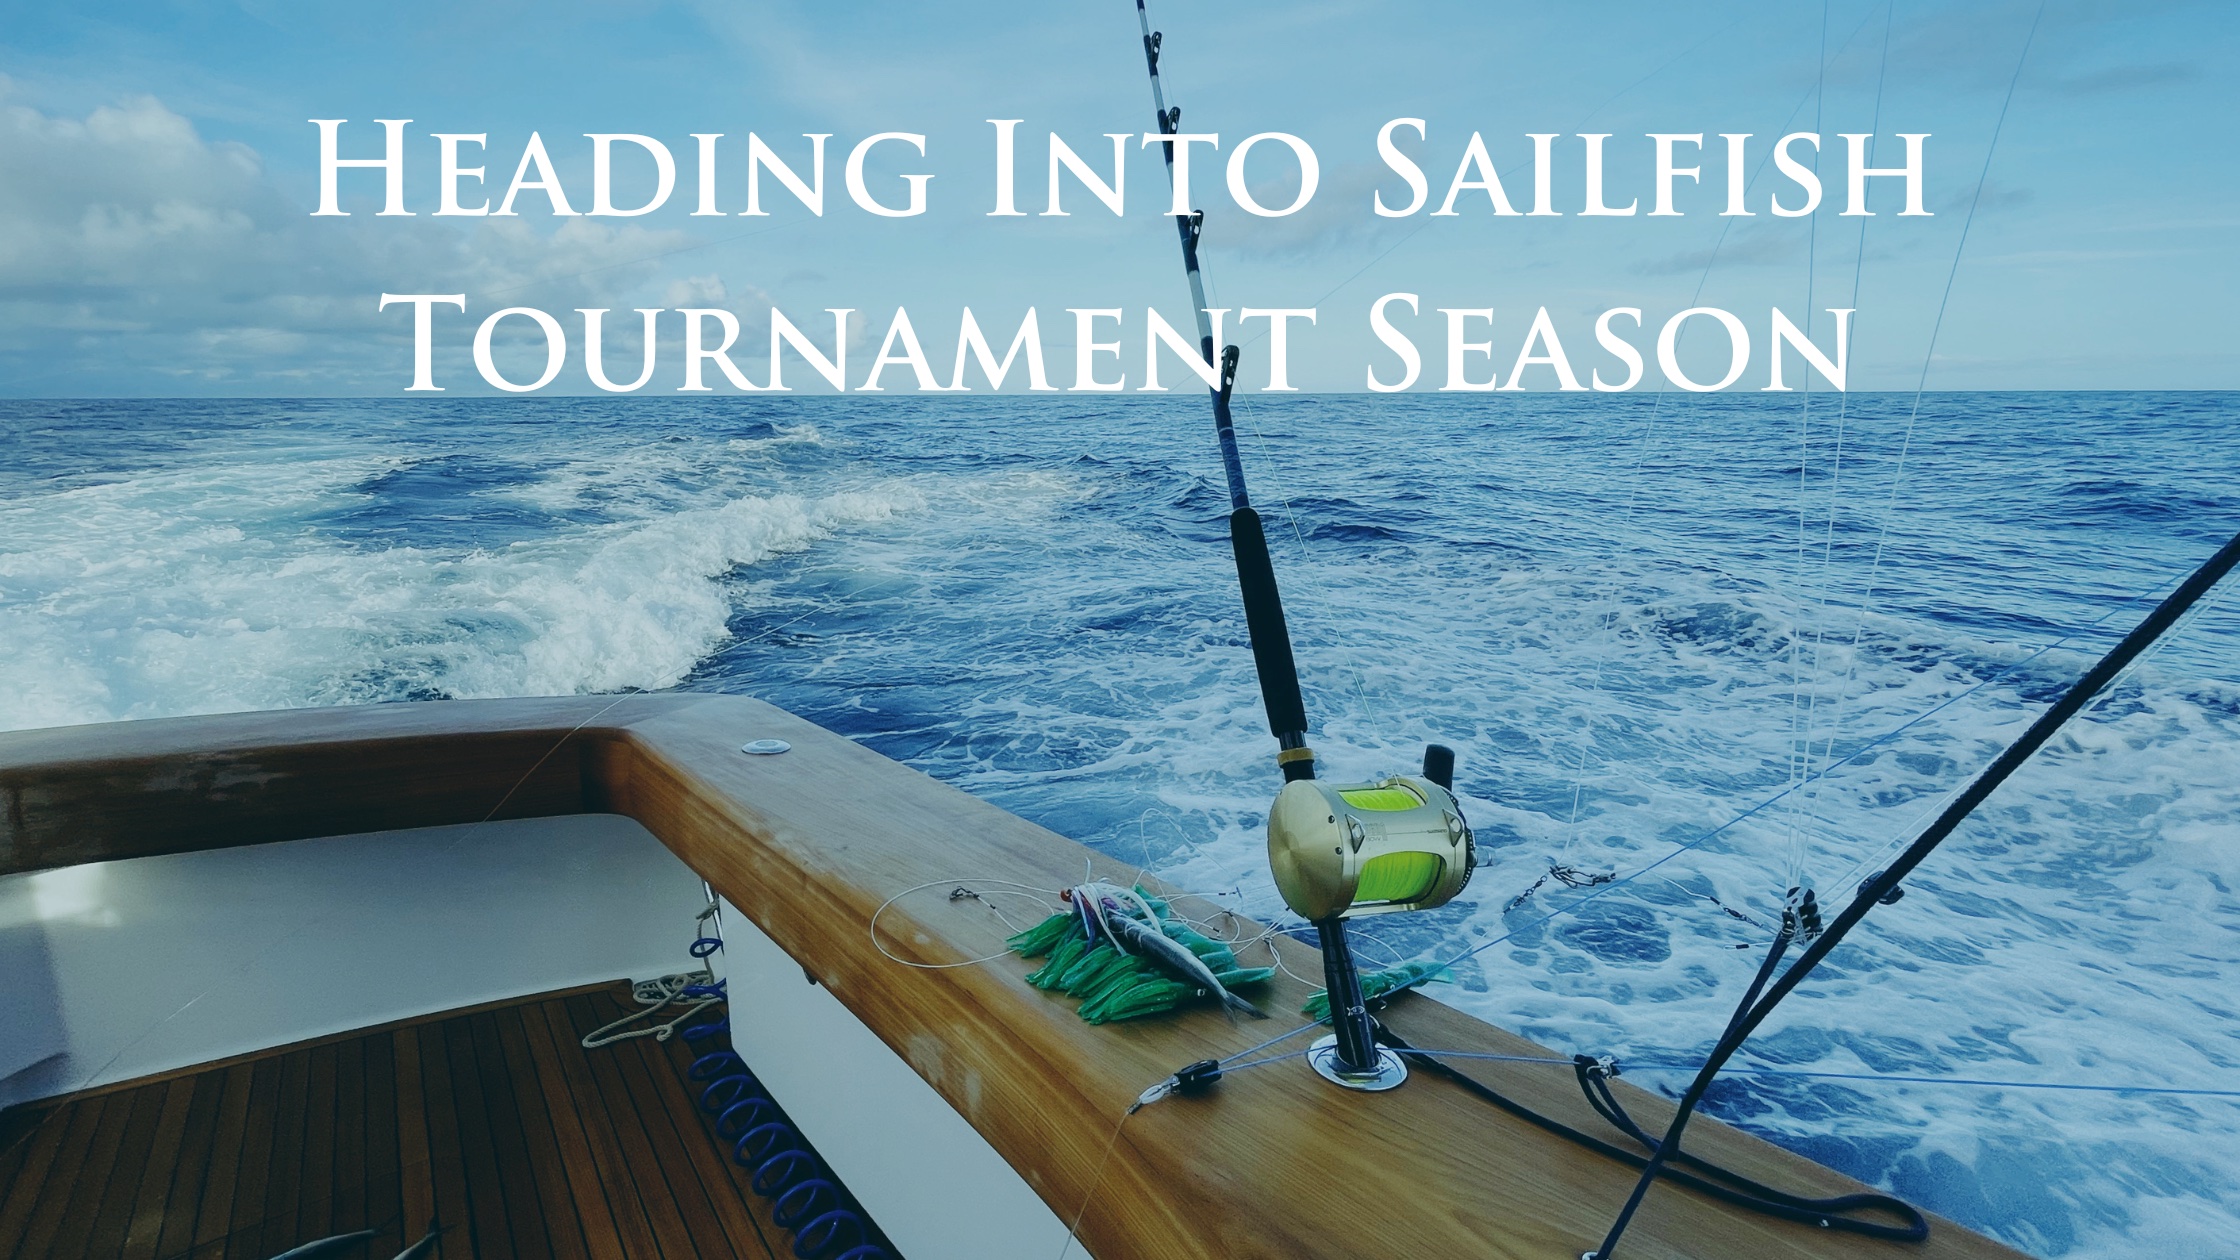 South Florida Sailfish Tournament Season: What to Know About Upcoming Events